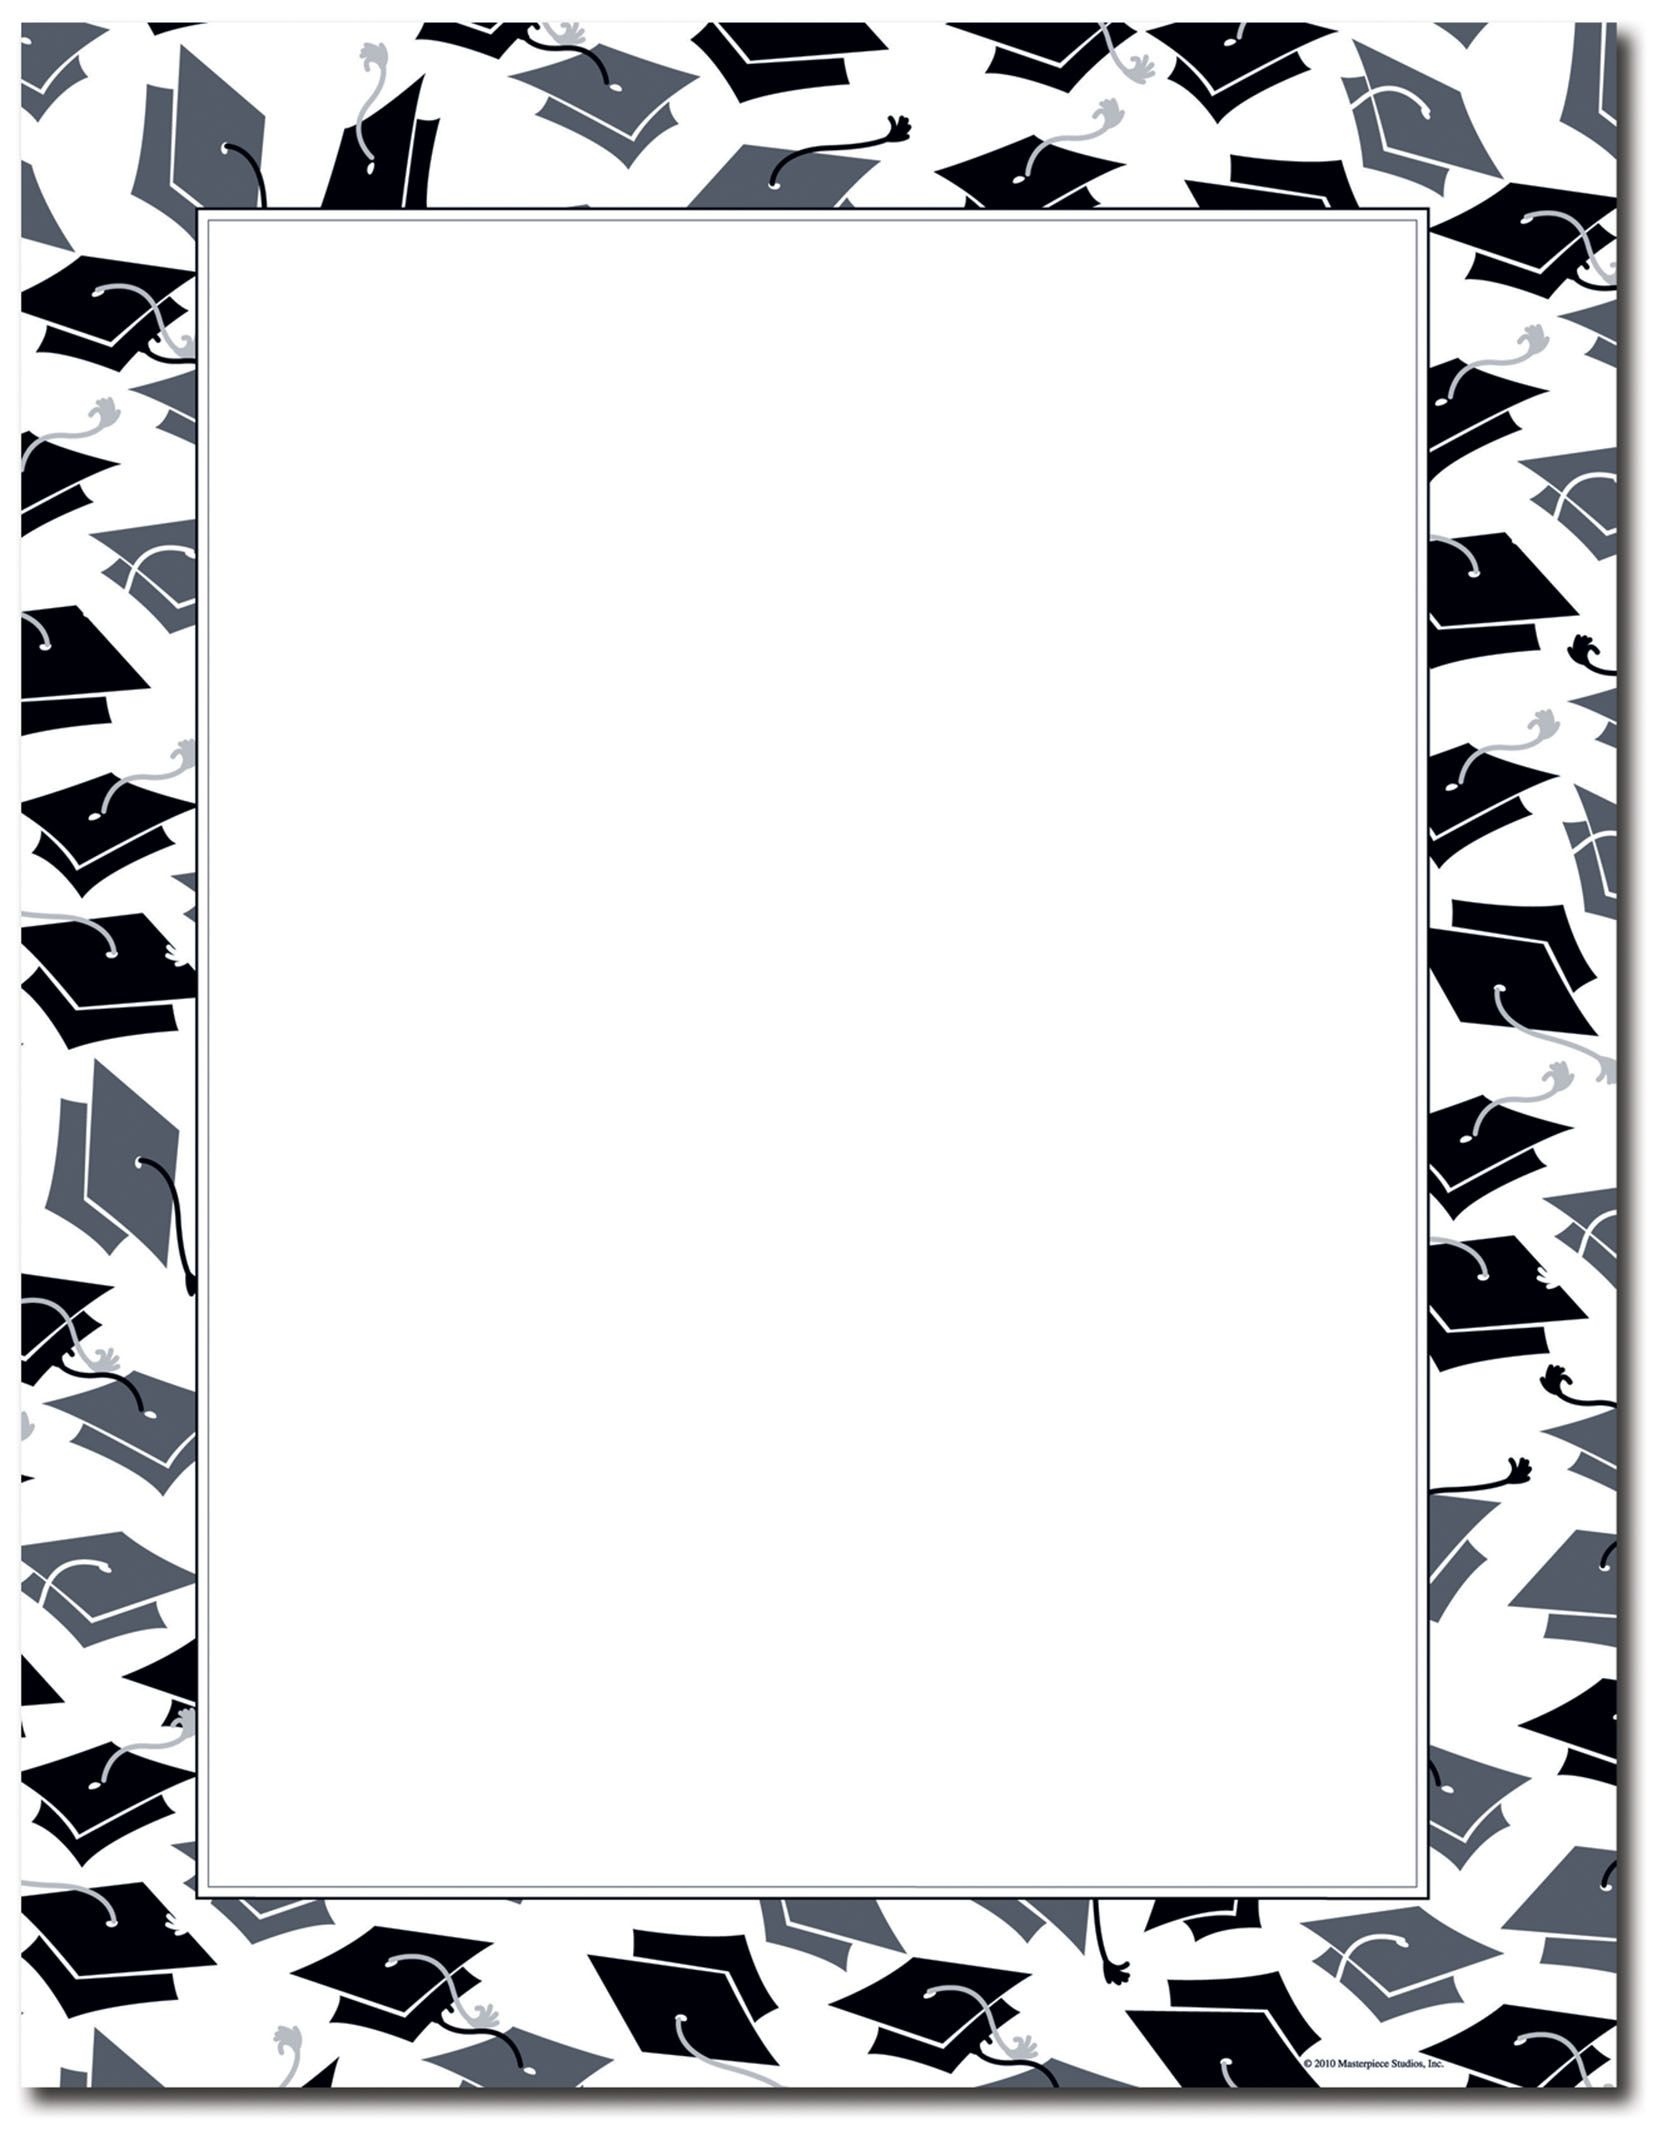 15 Free Graduation Borders {With 5 New Designs!} Home Printables